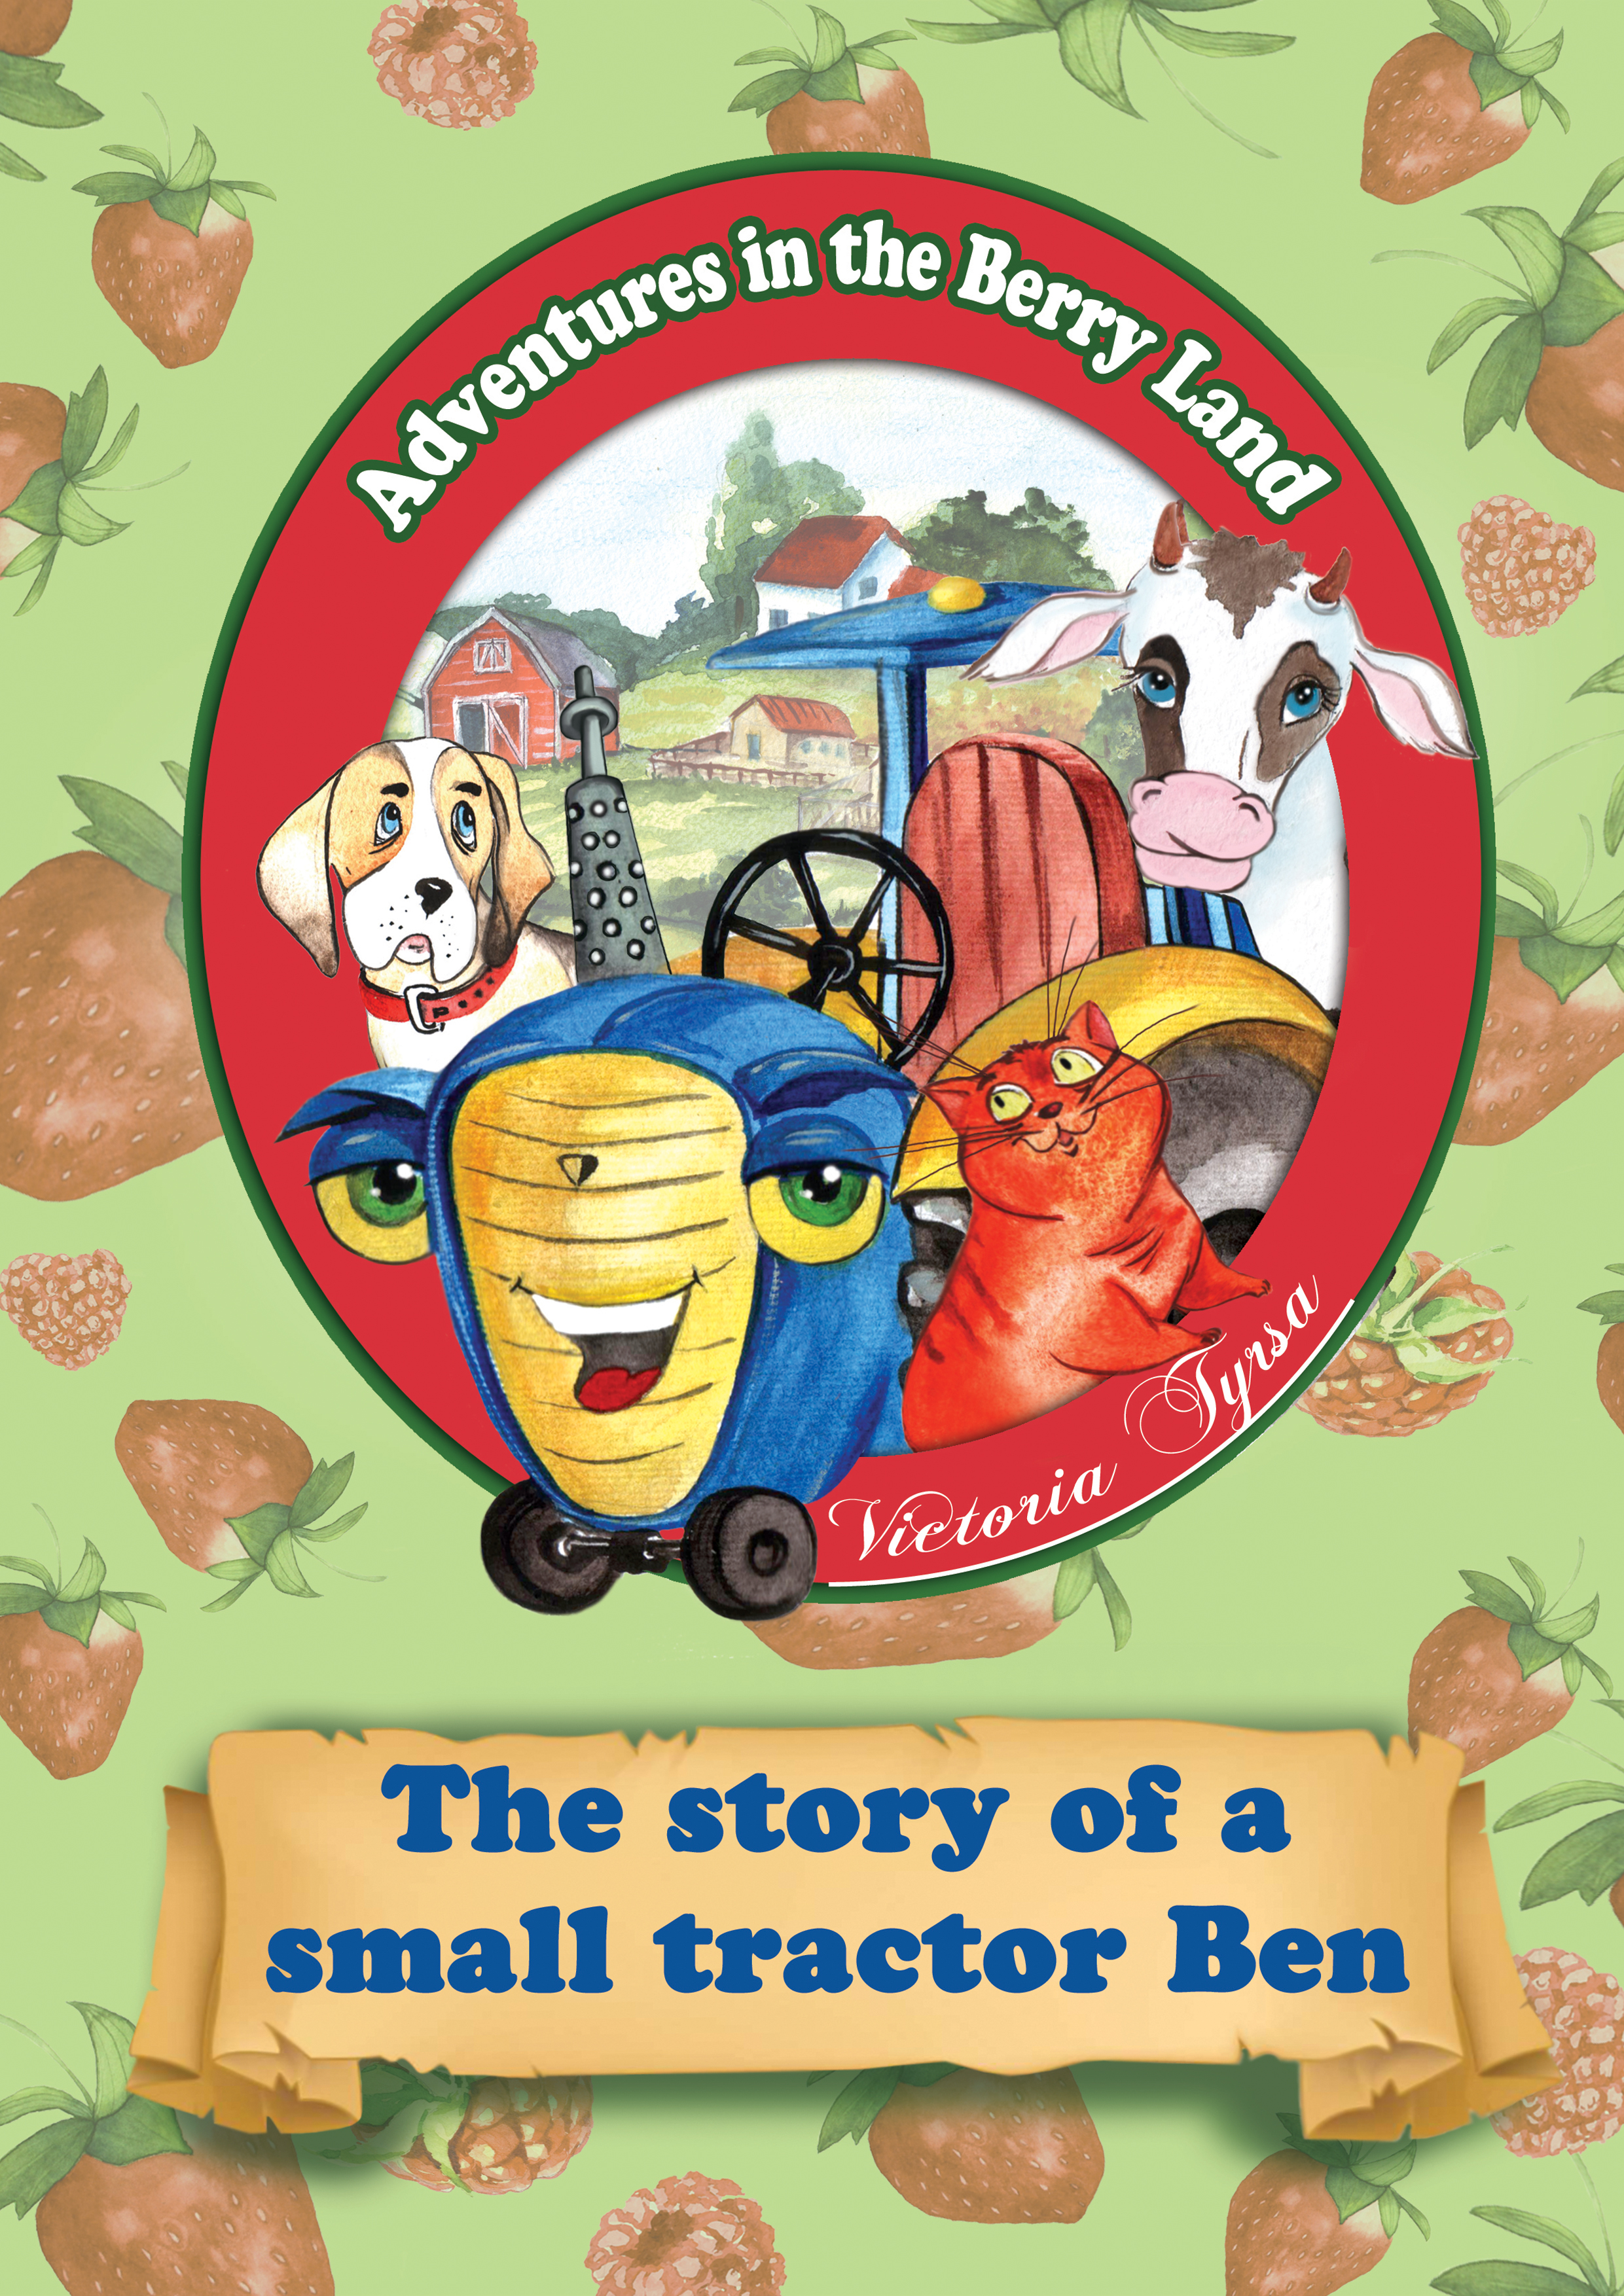 FREE: The story of a small tractor Ben (Adventures in the Berry Land Book 1) by Victoria Tyrsa